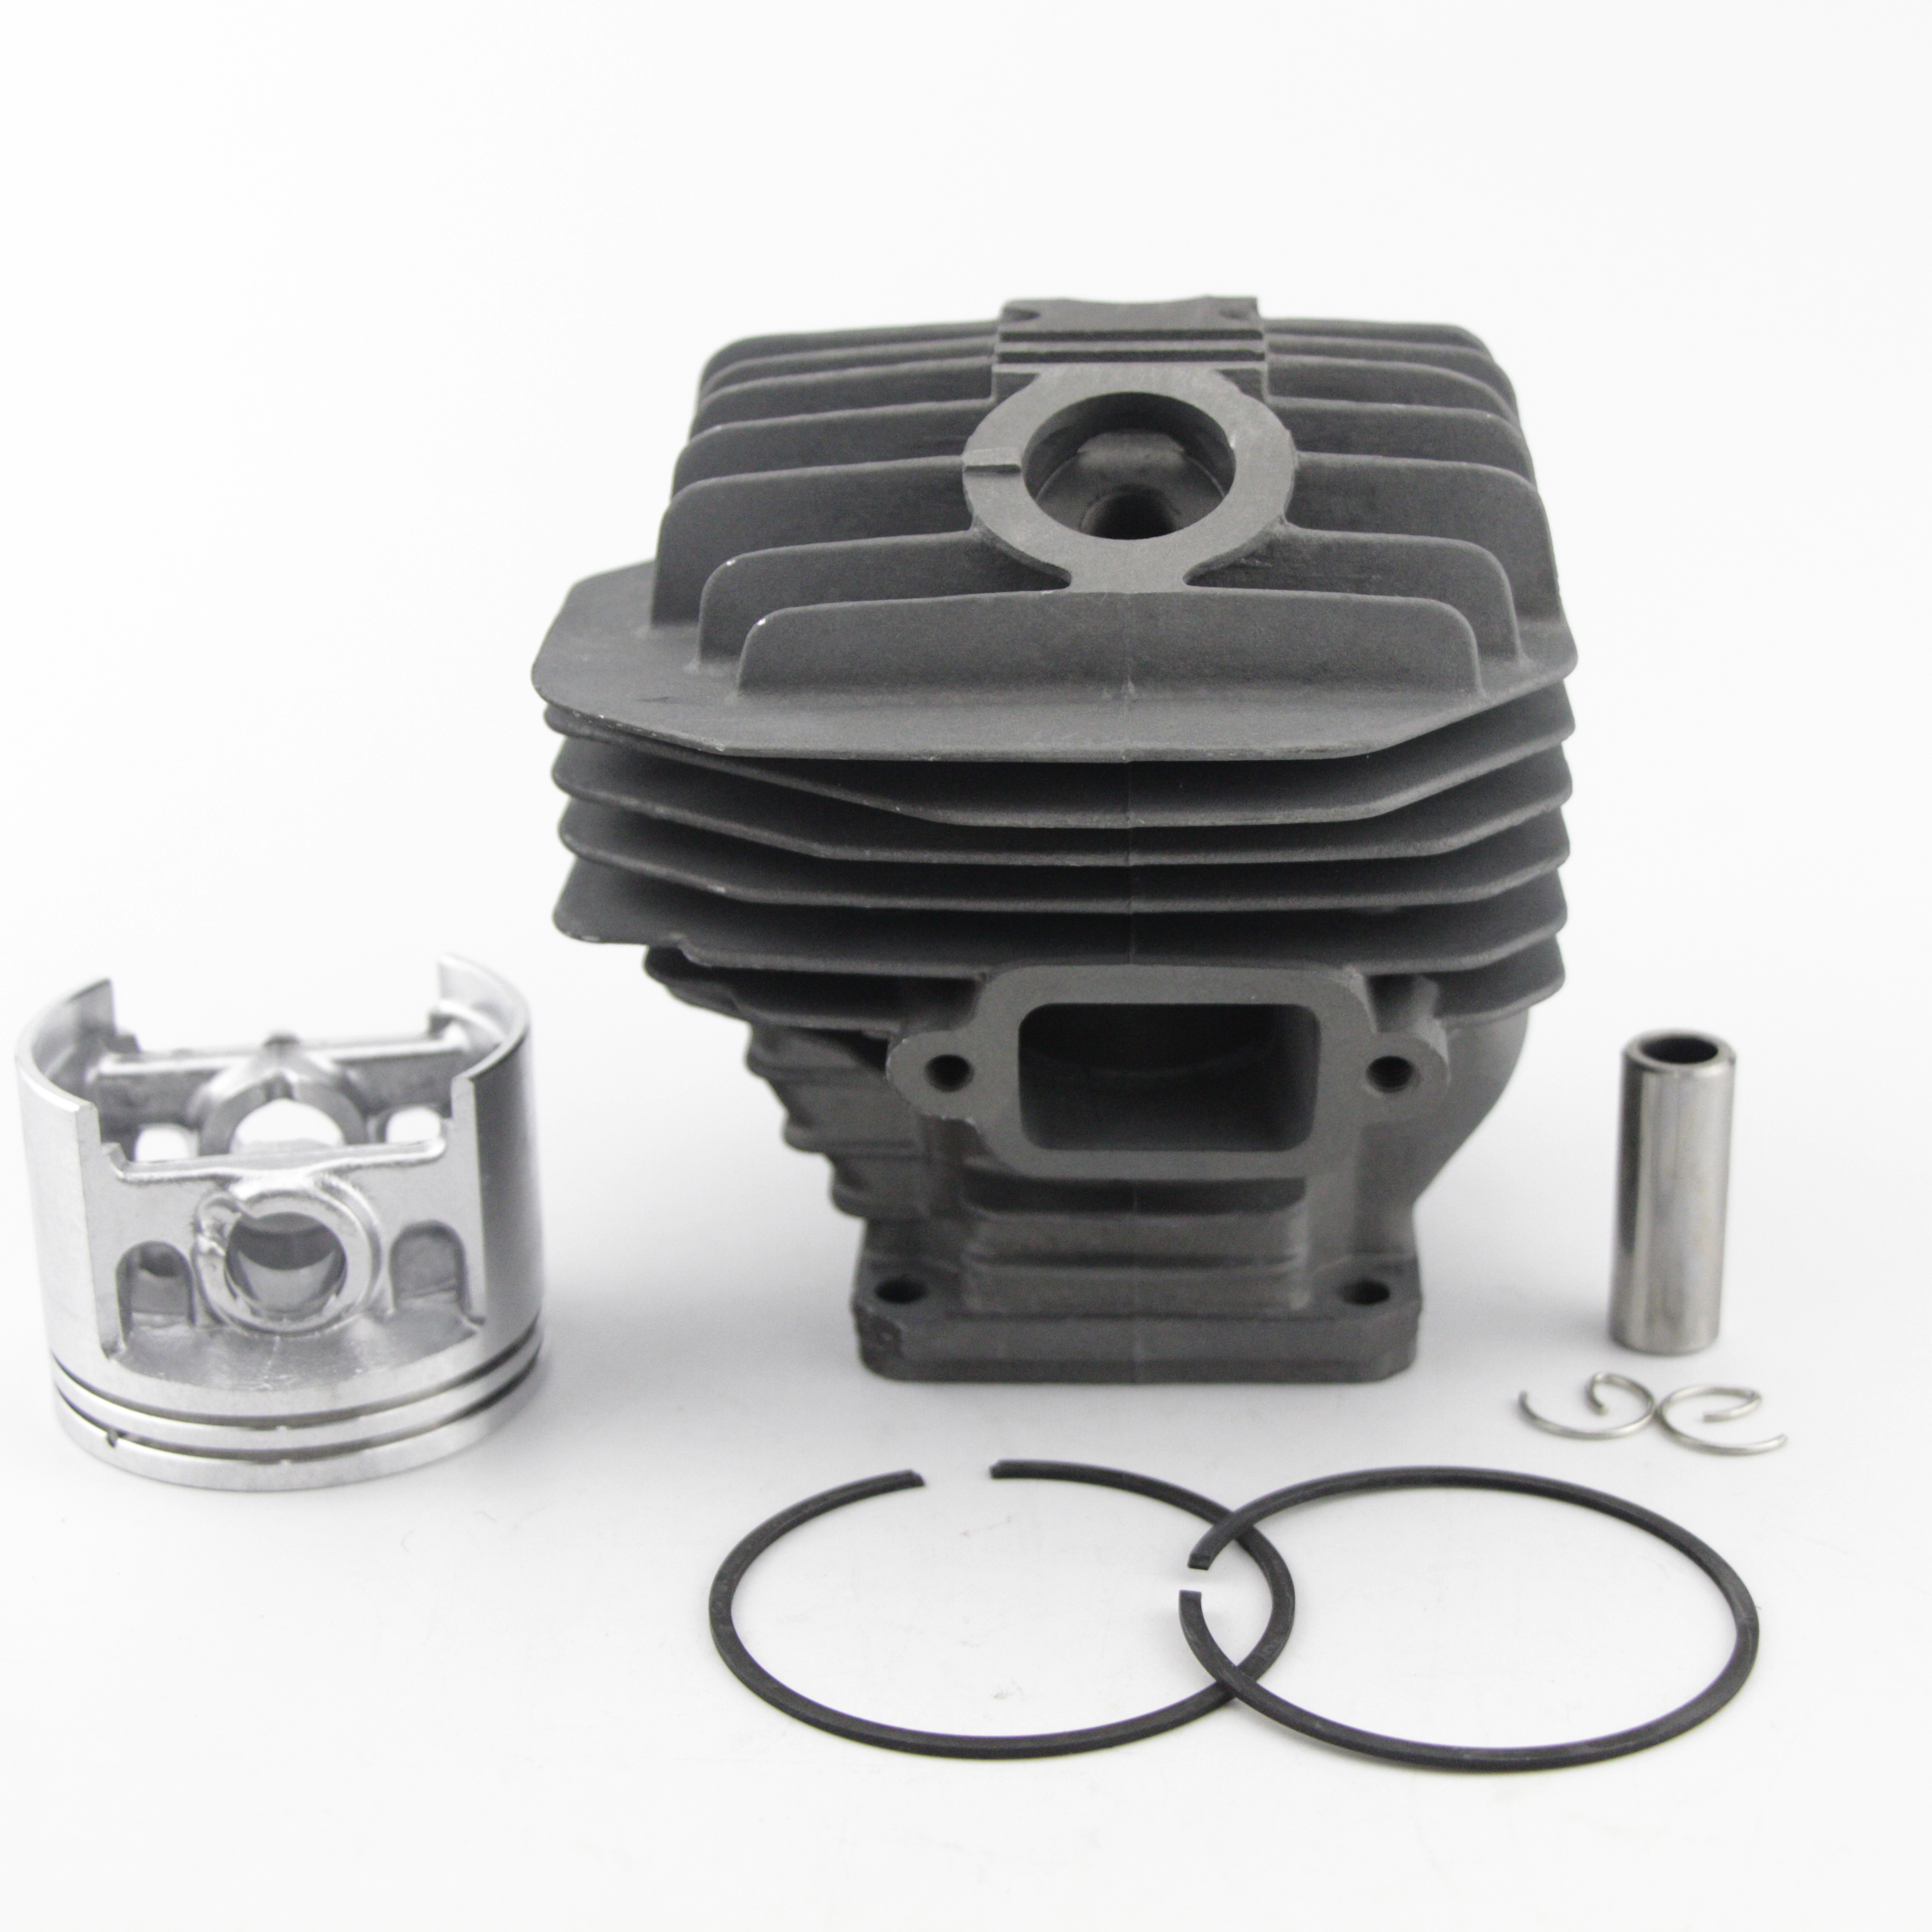 Big Bore 52MM Cylinder Piston Kit For Stihl MS440 044 Chainsaw Big Bore with Decomp. Port # 1128 020 1227